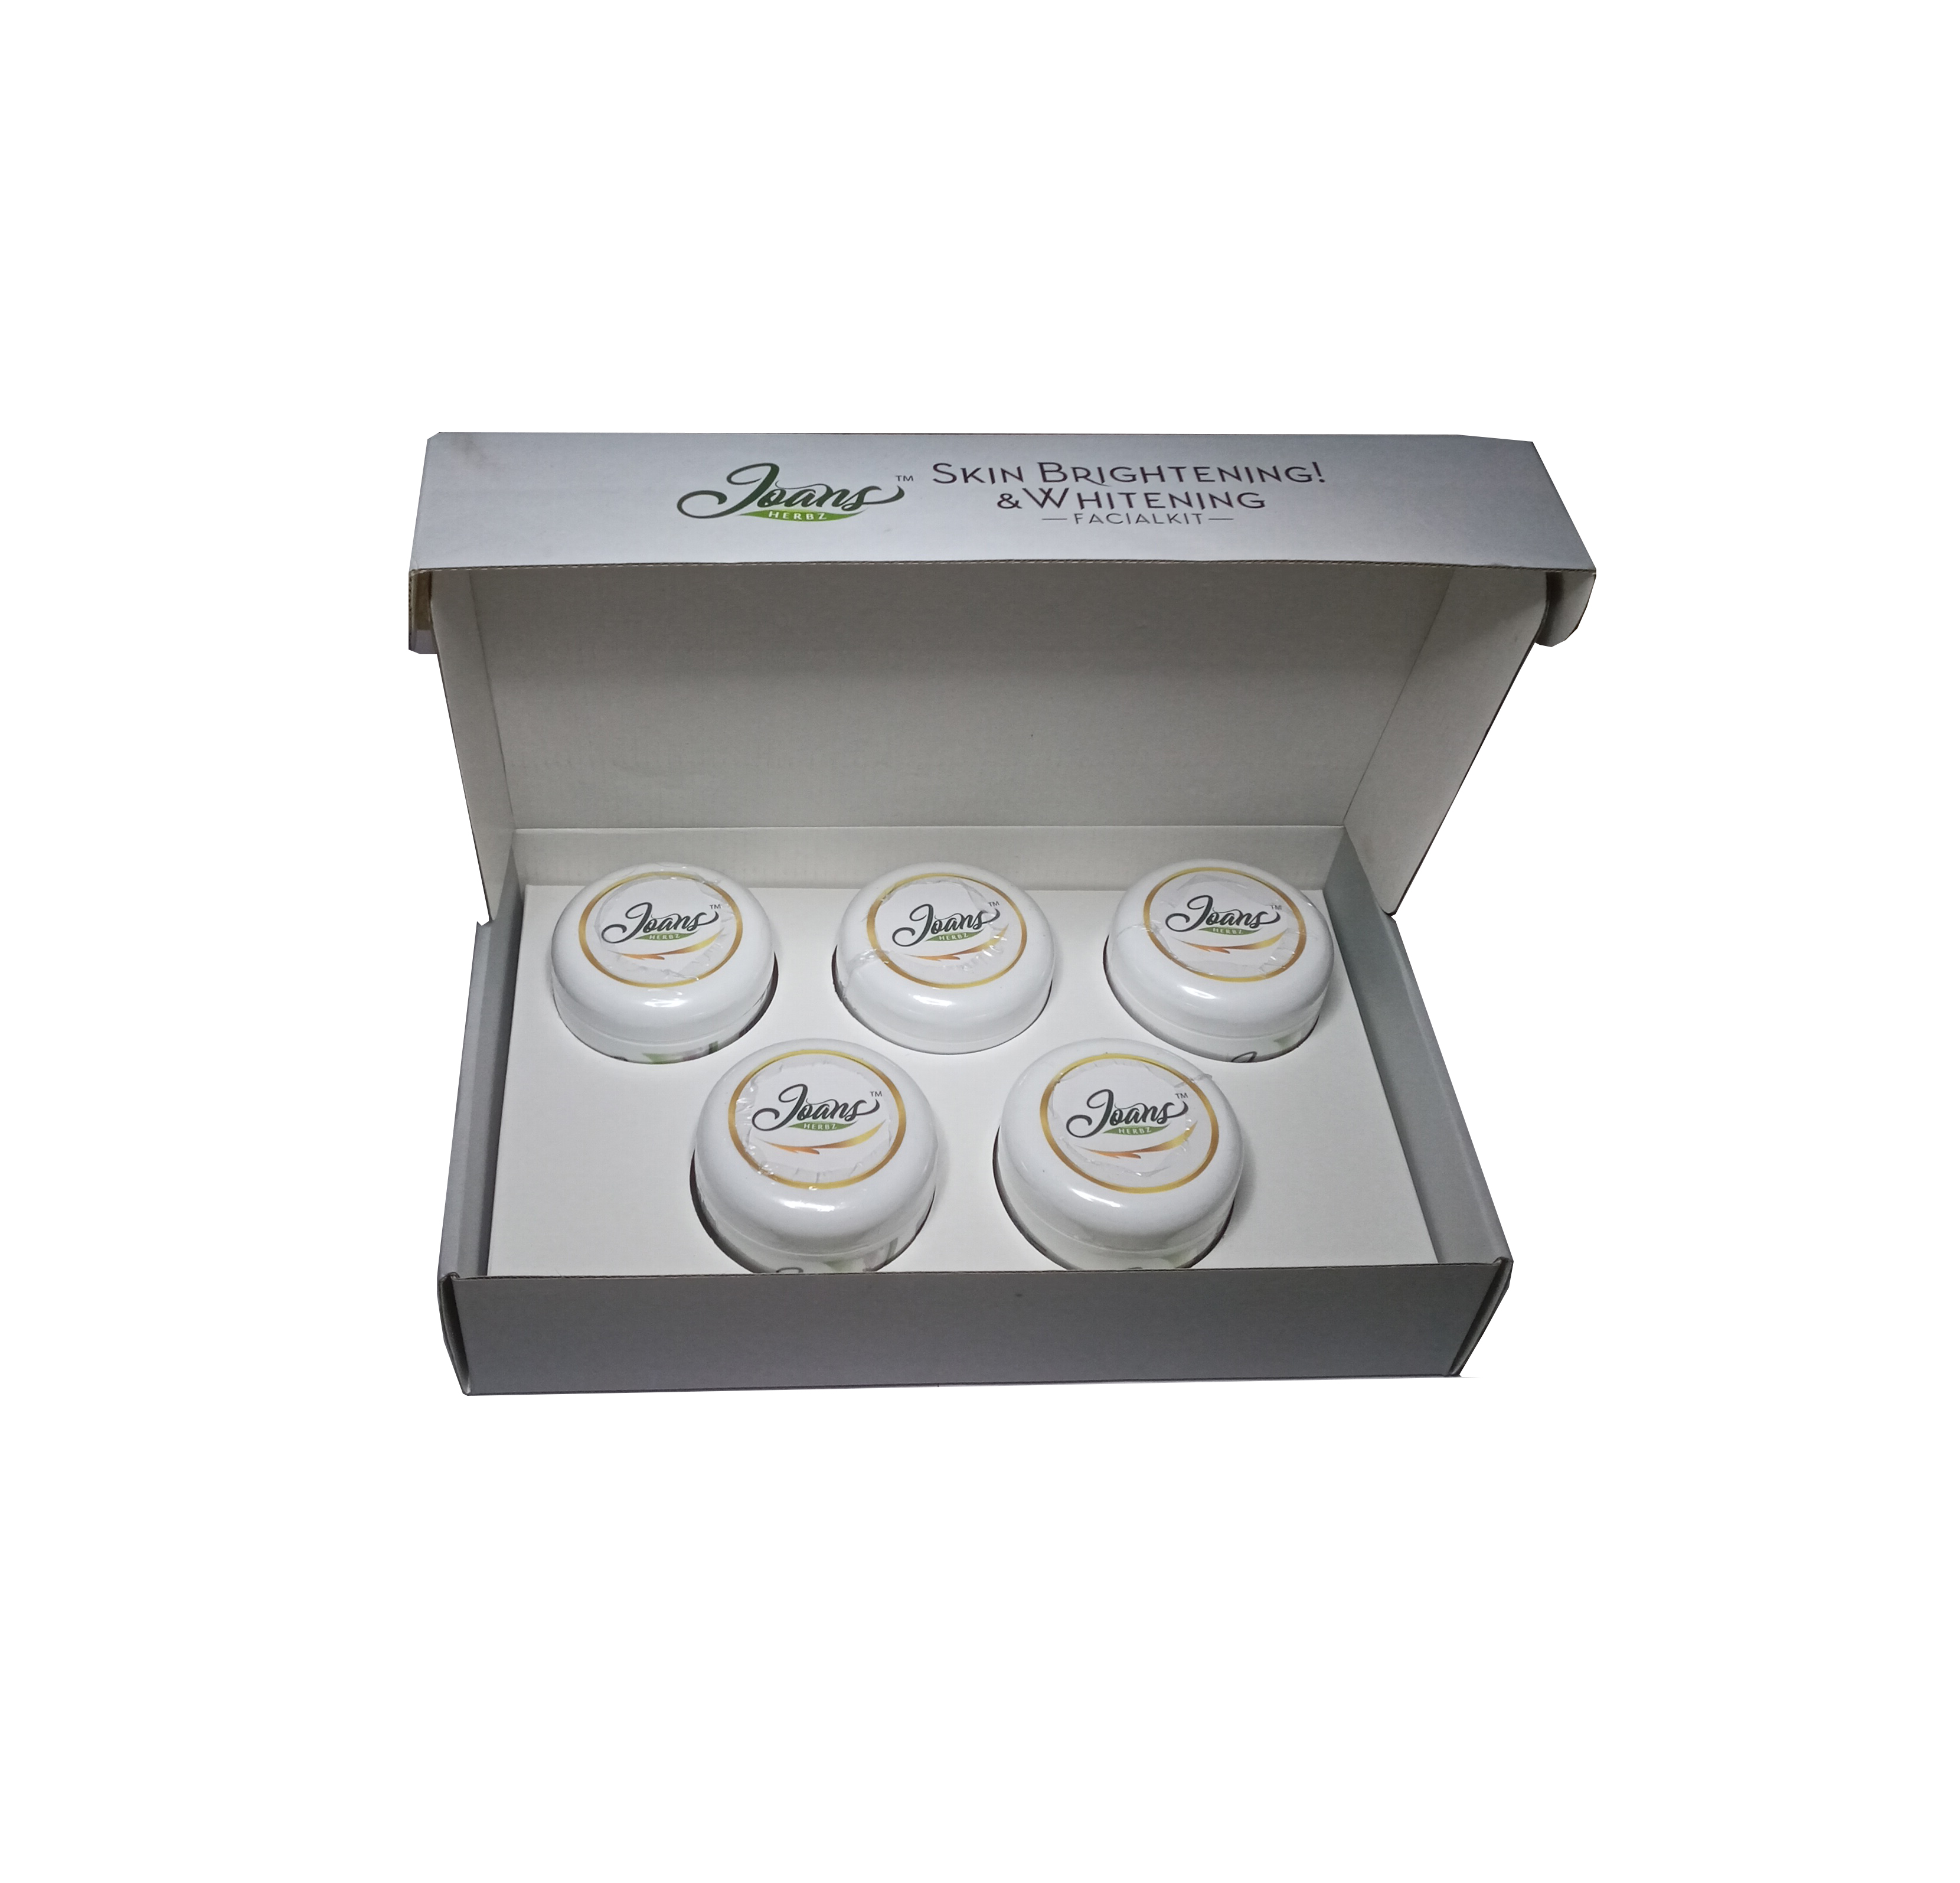 JoansHerbz Brightening and Whitening facial kit for Beauty Parlor Use.